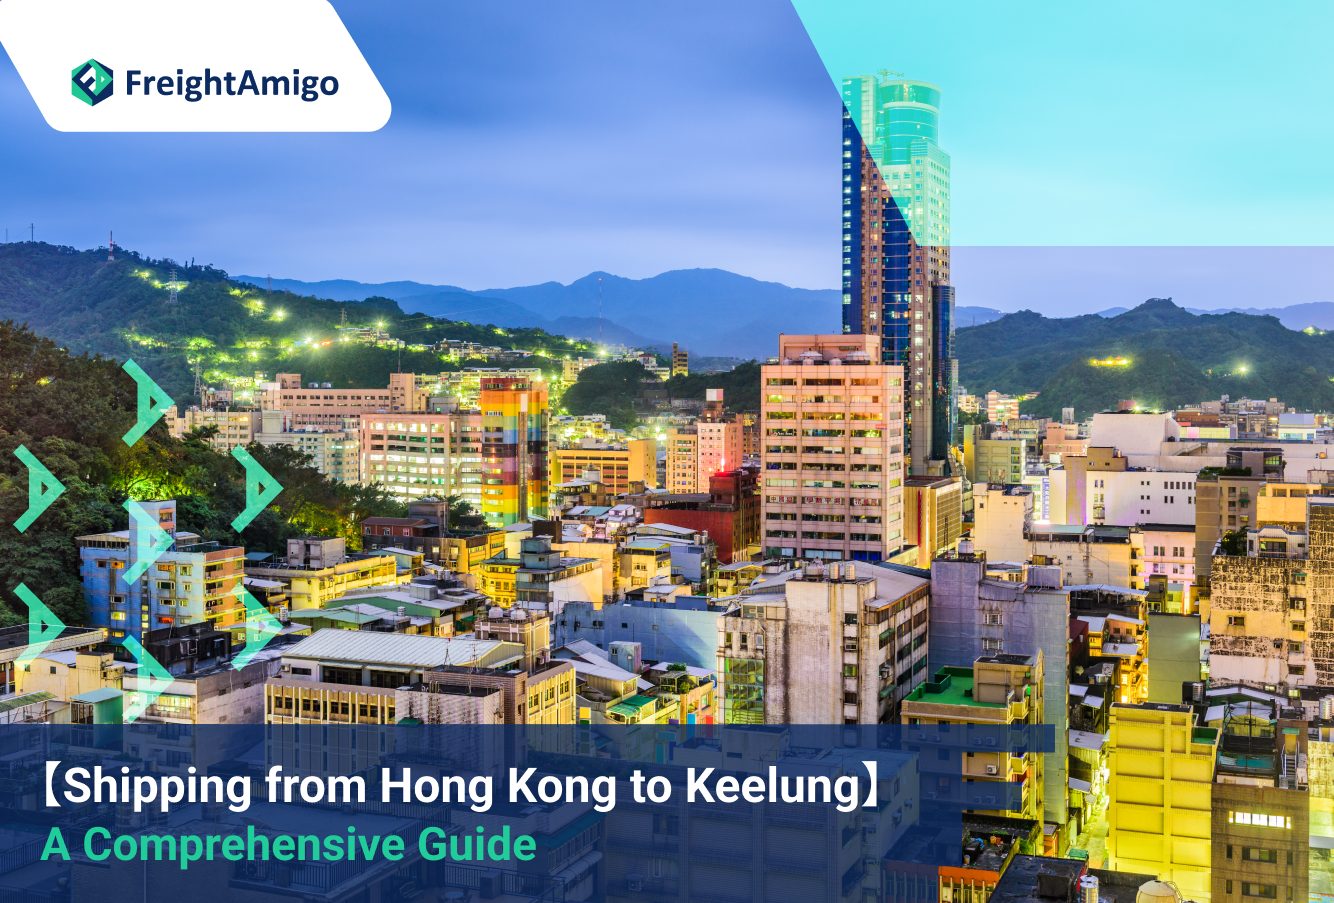 Shipping from Hong Kong to Keelung: A Comprehensive Guide